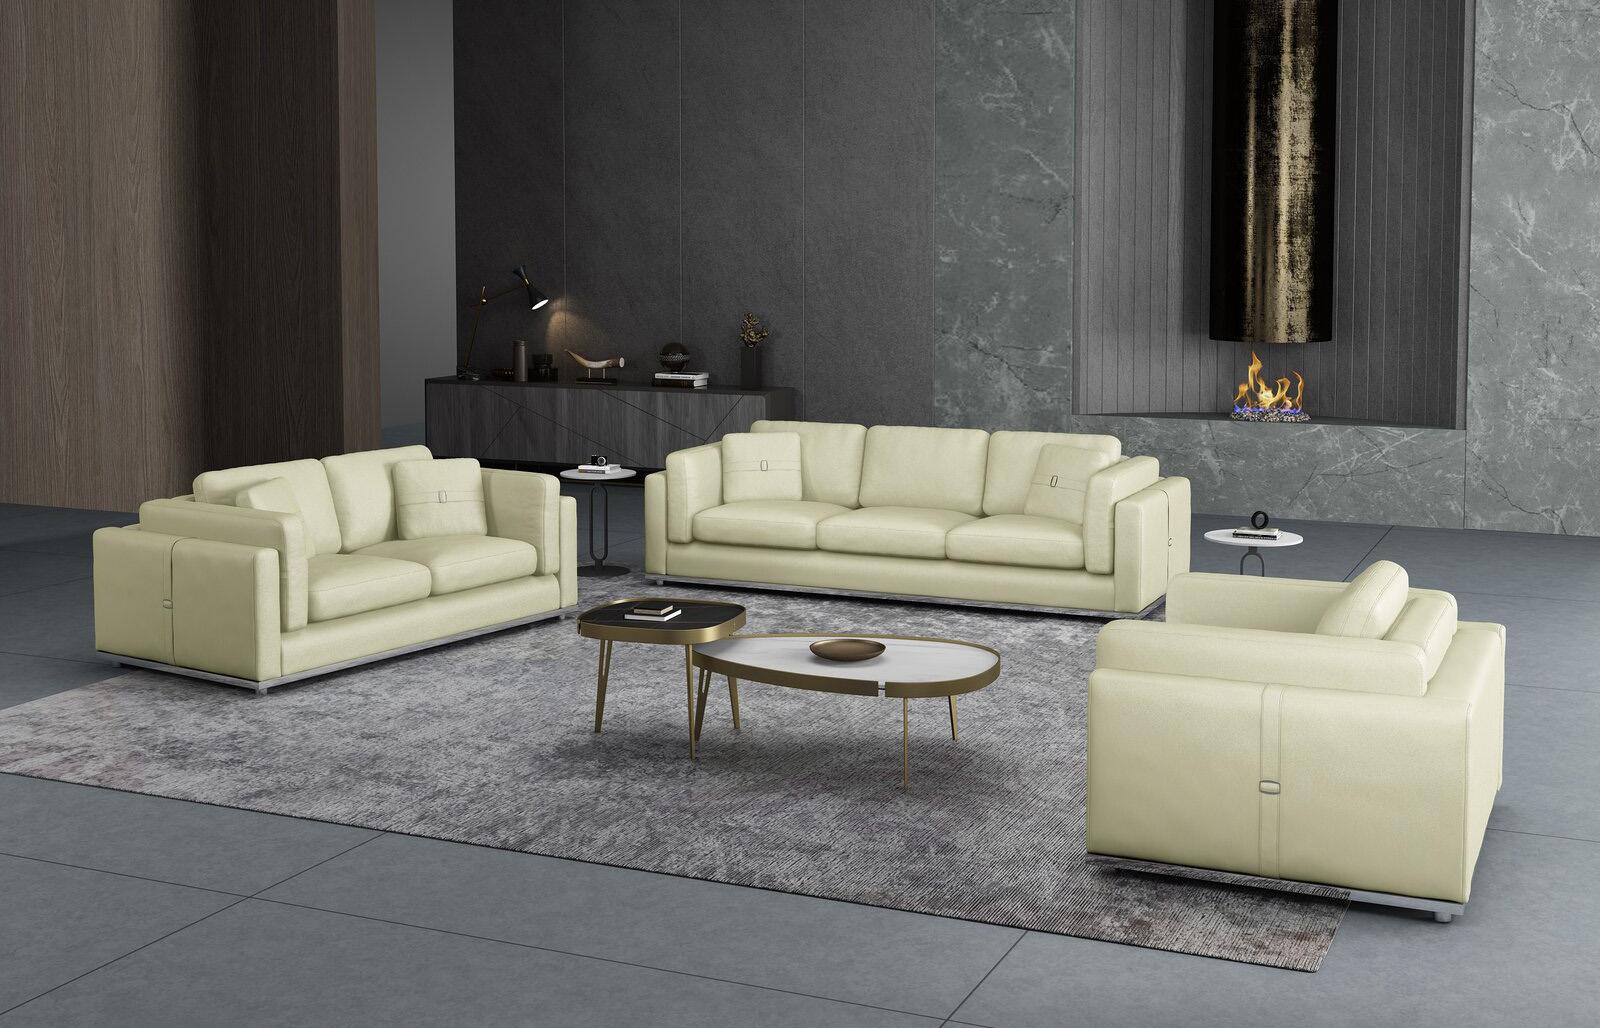 Contemporary, Modern Sofa Set PICASSO EF-25551-3PC in Off-White Leather